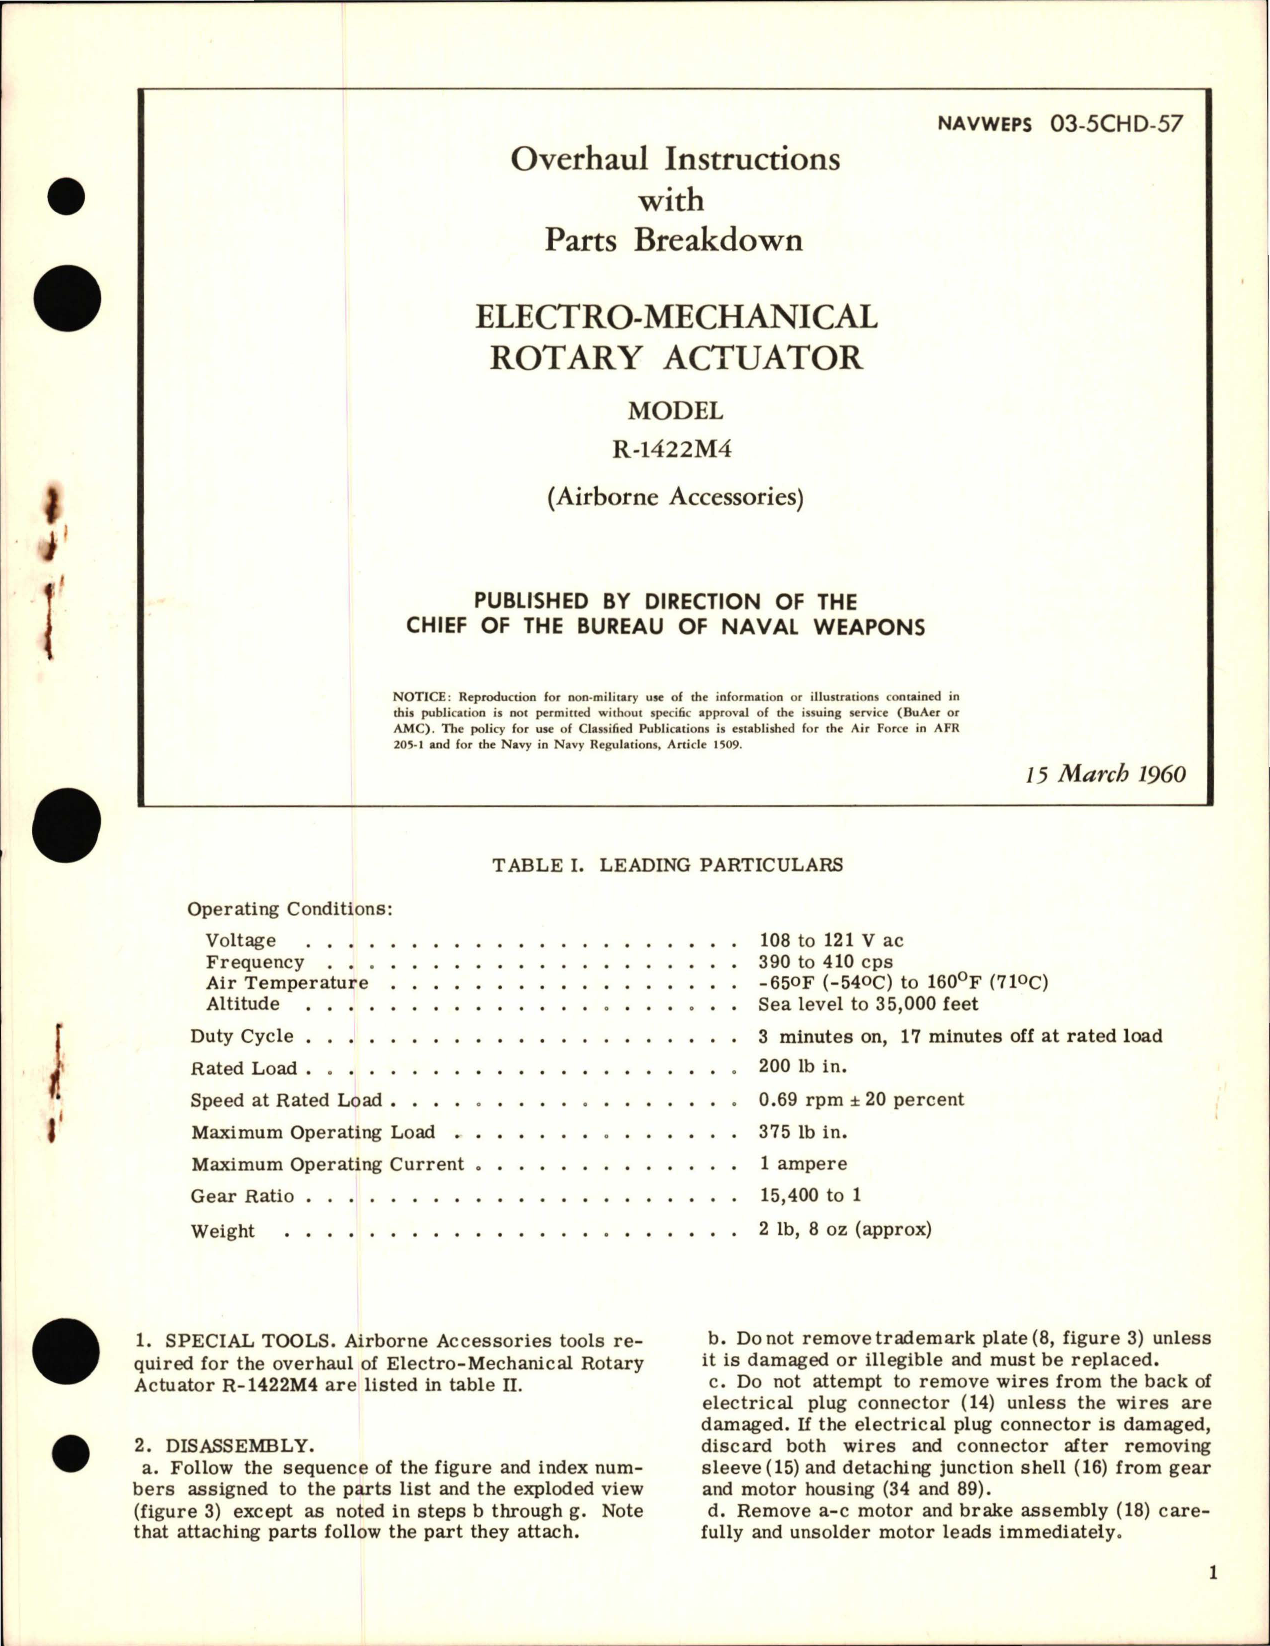 Sample page 1 from AirCorps Library document: Overhaul Instruments with Parts Breakdown for Electro-Mechanical Rotary Actuator Model R-1422M4